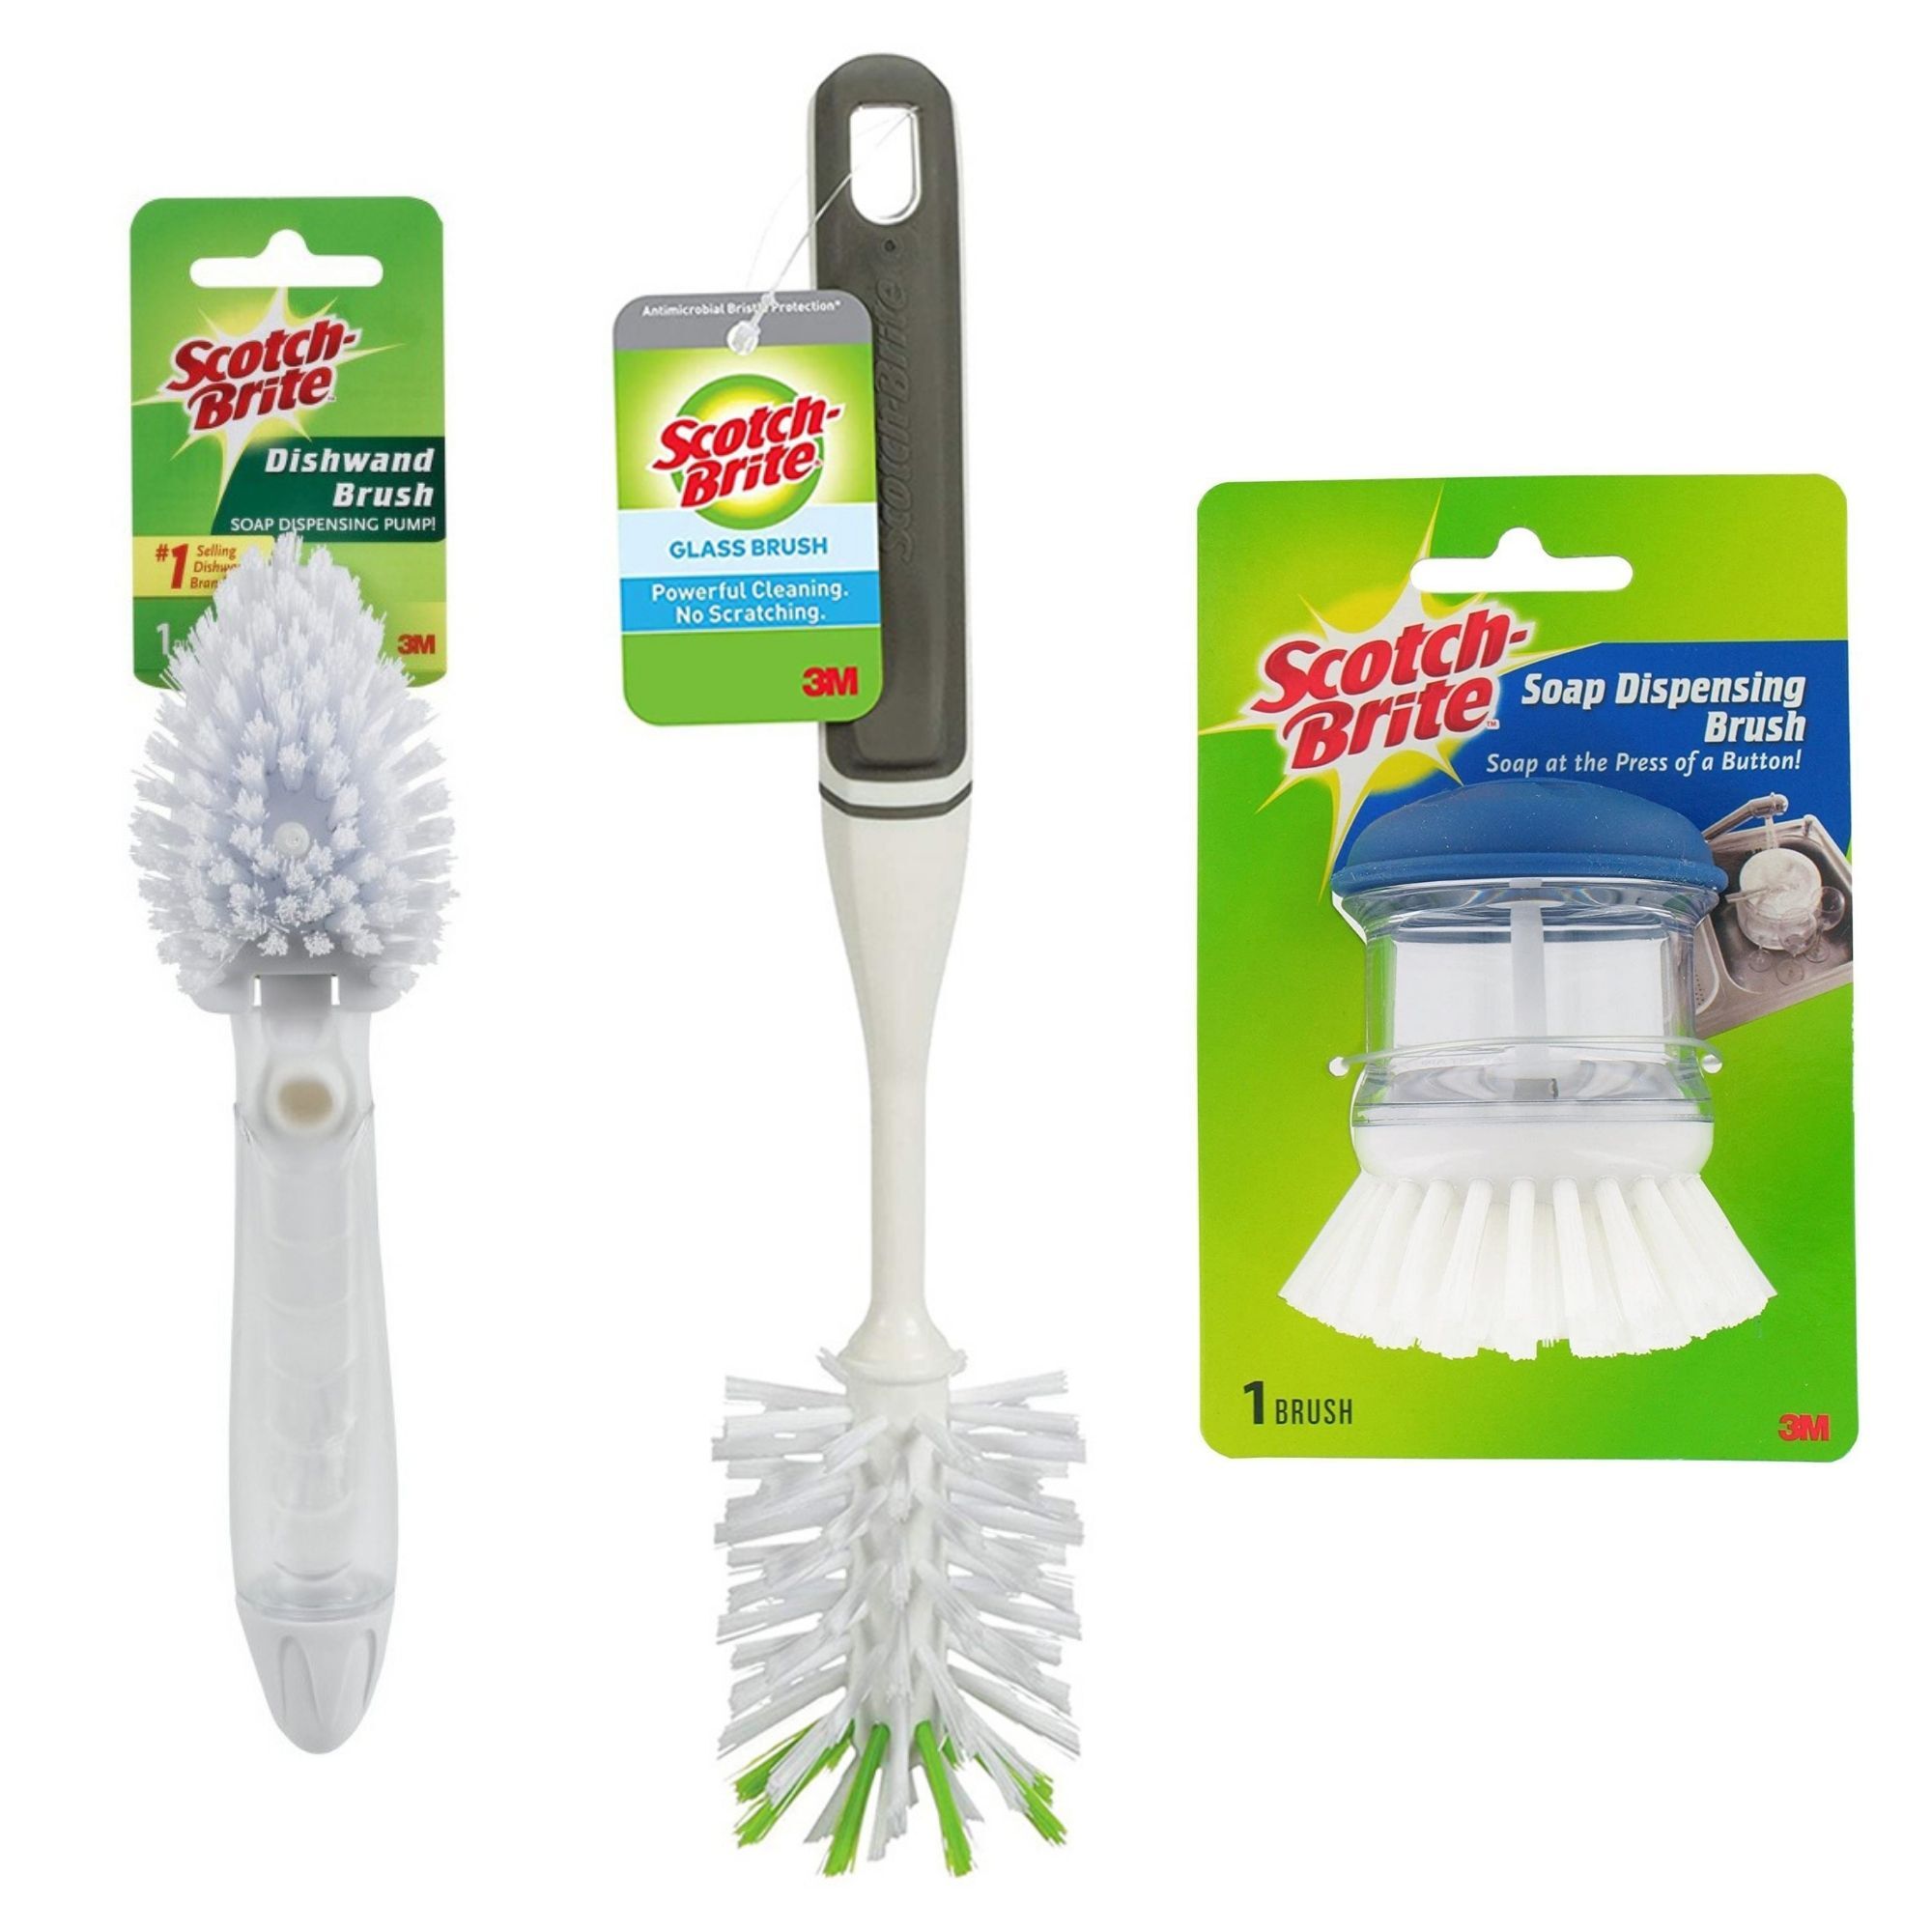 Freeship "NEW" 3M SCOTCH BRITE Toilet Bowl Cleaner Scrubber Brushes 6 Refills 